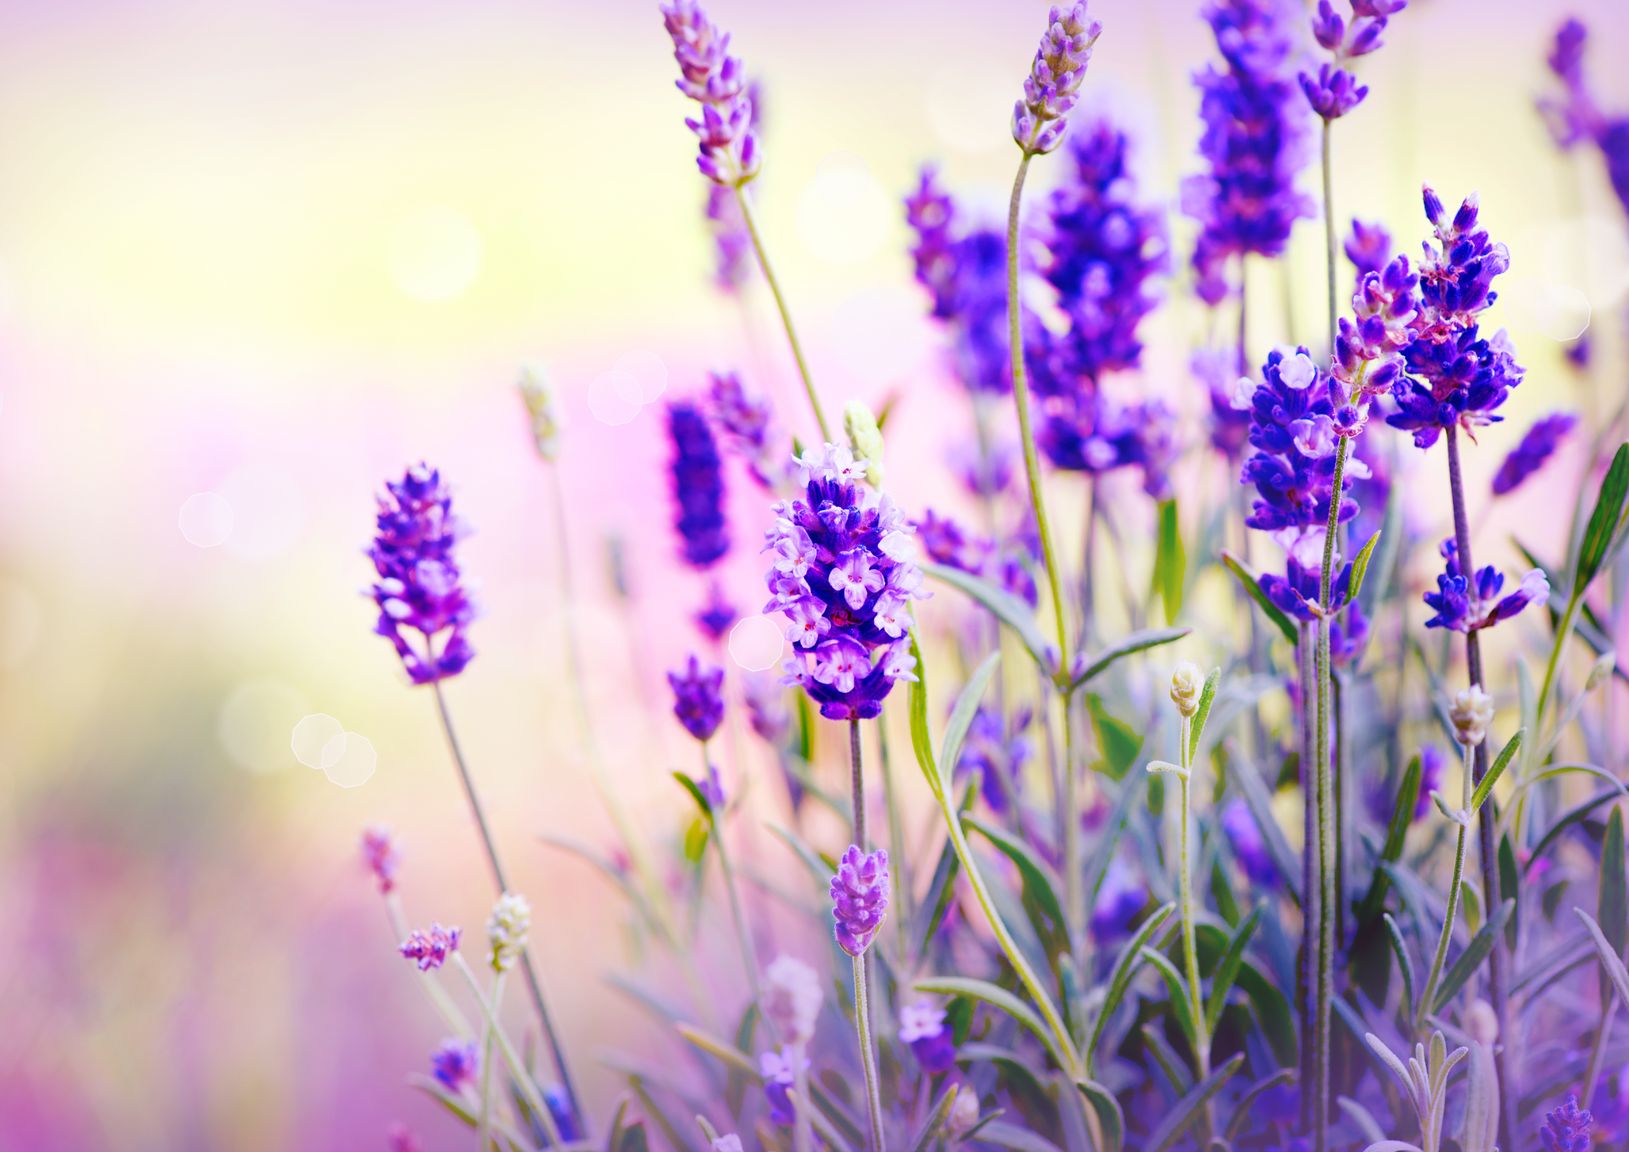 Lavender in Your Daily Life - Four Little-Known Uses